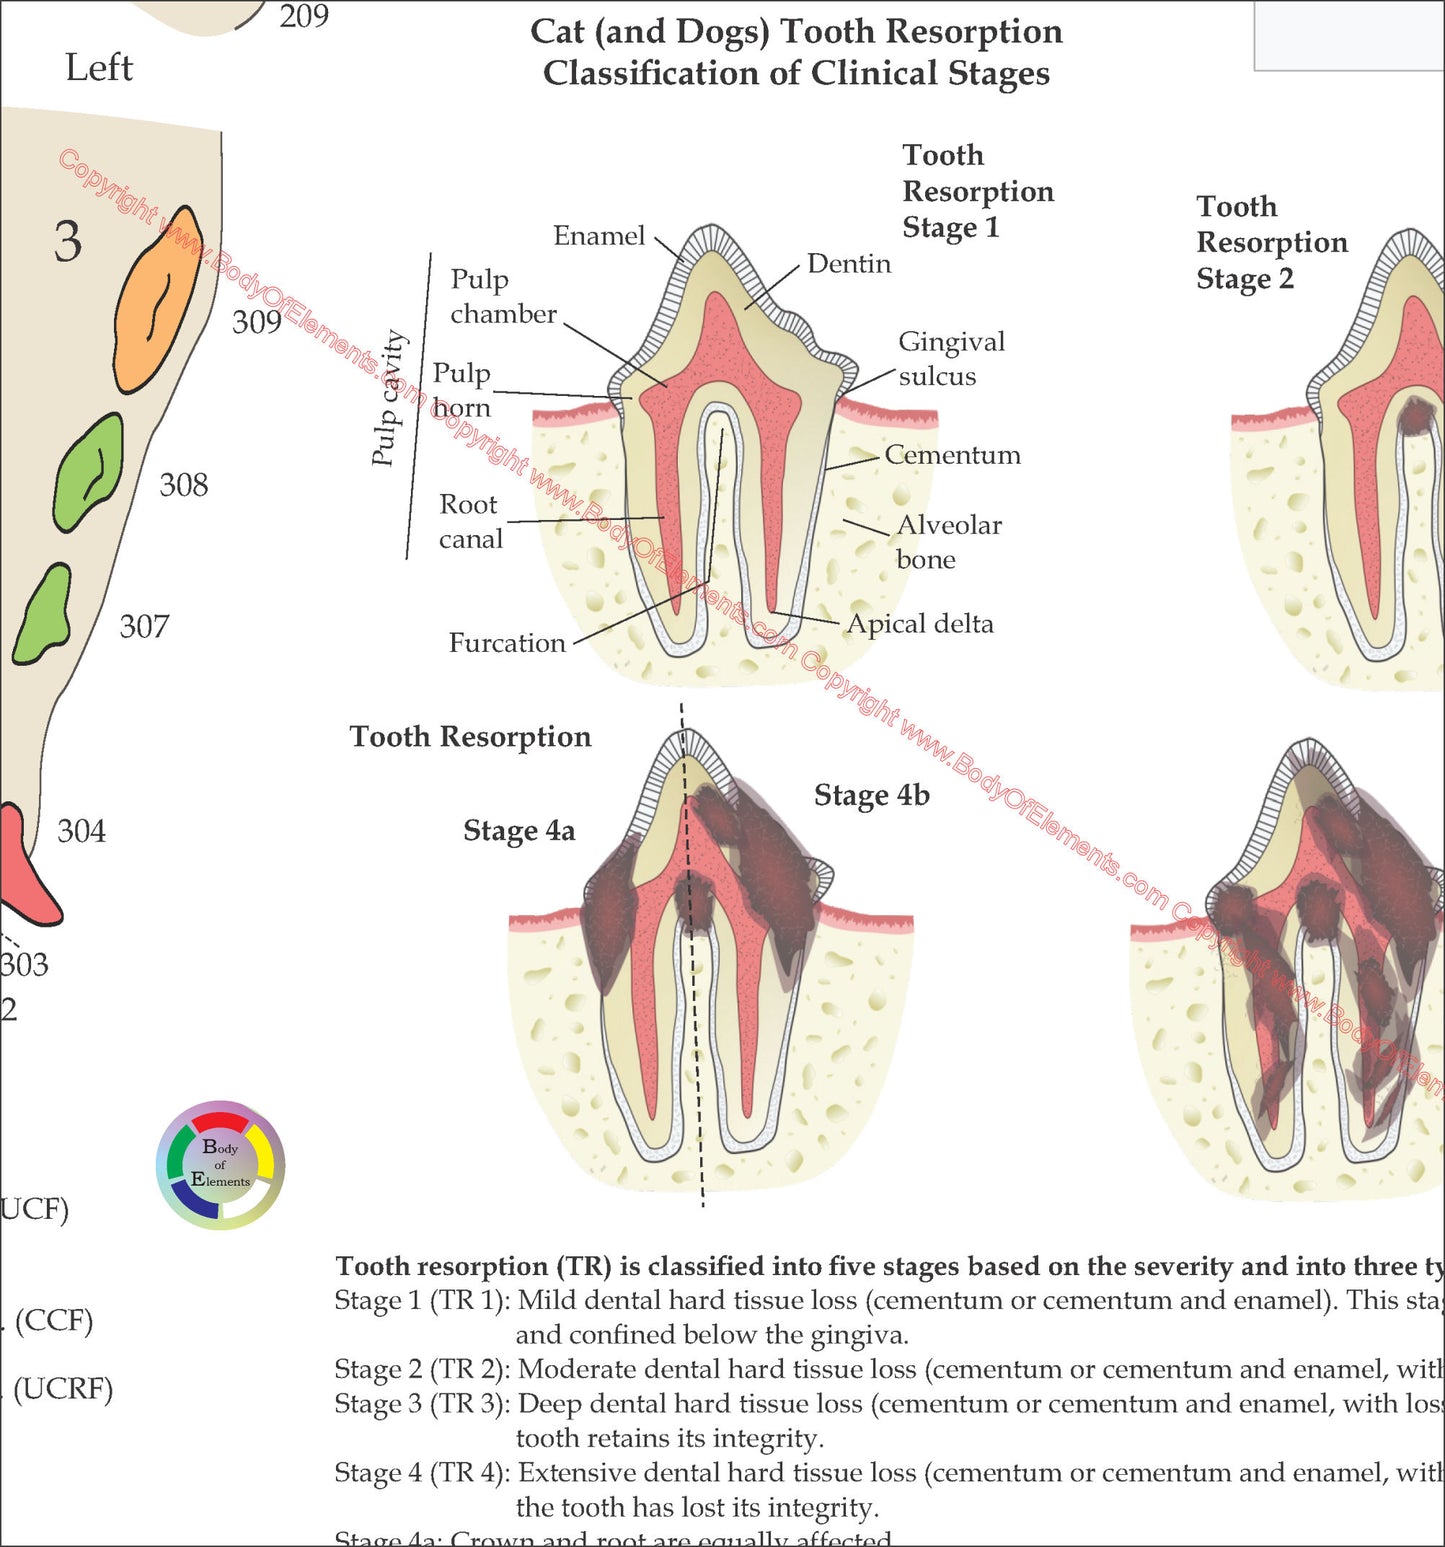 Cat tooth resorption classifications of clinical stages diagram